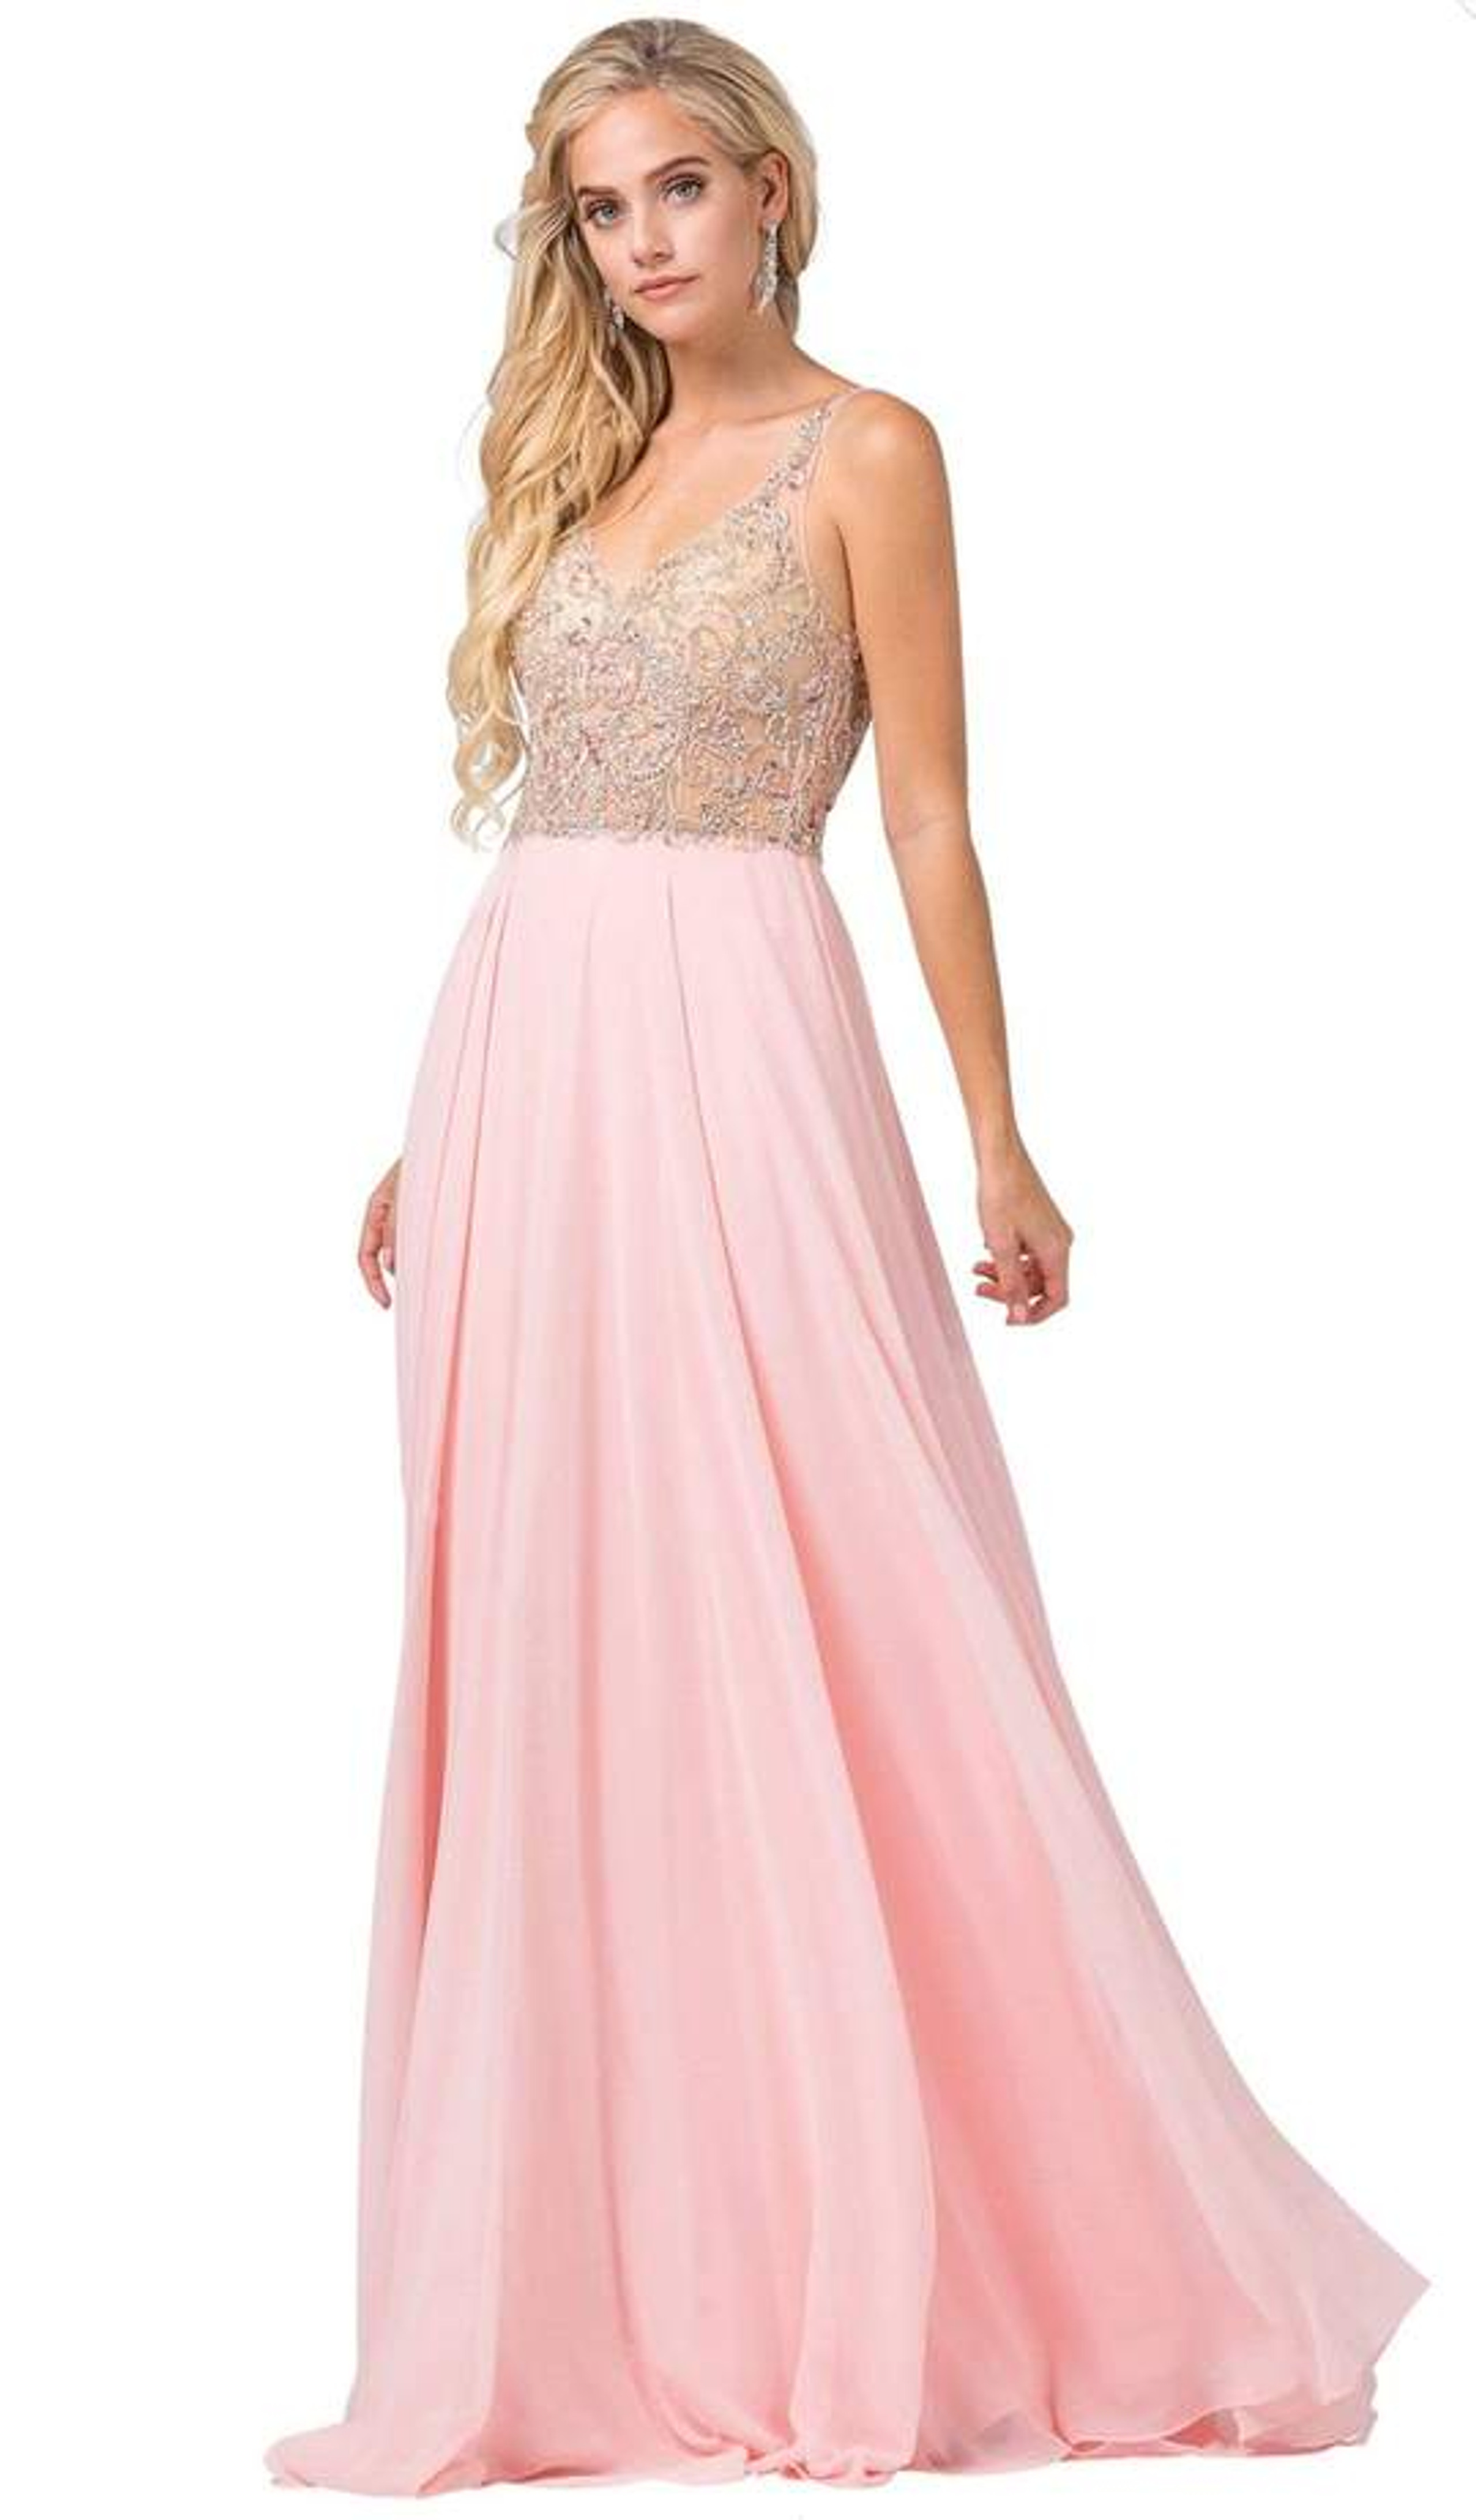 Dancing Queen 2615 Sleeveless Beaded Illusion Jewel Gown 7520